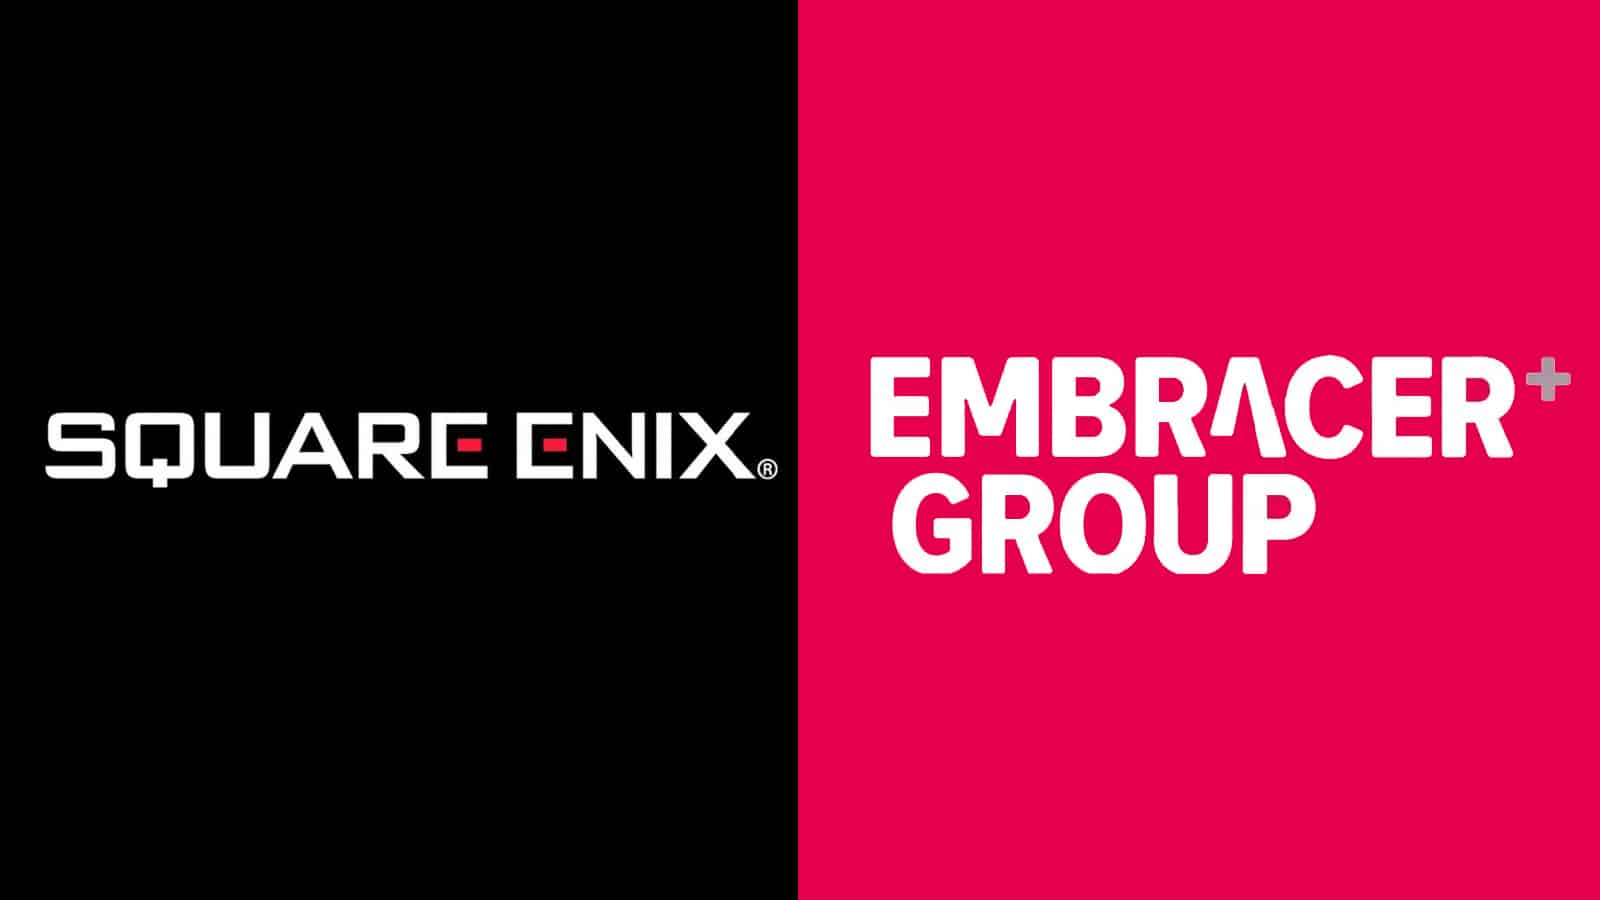 an image of square enix and embracer group